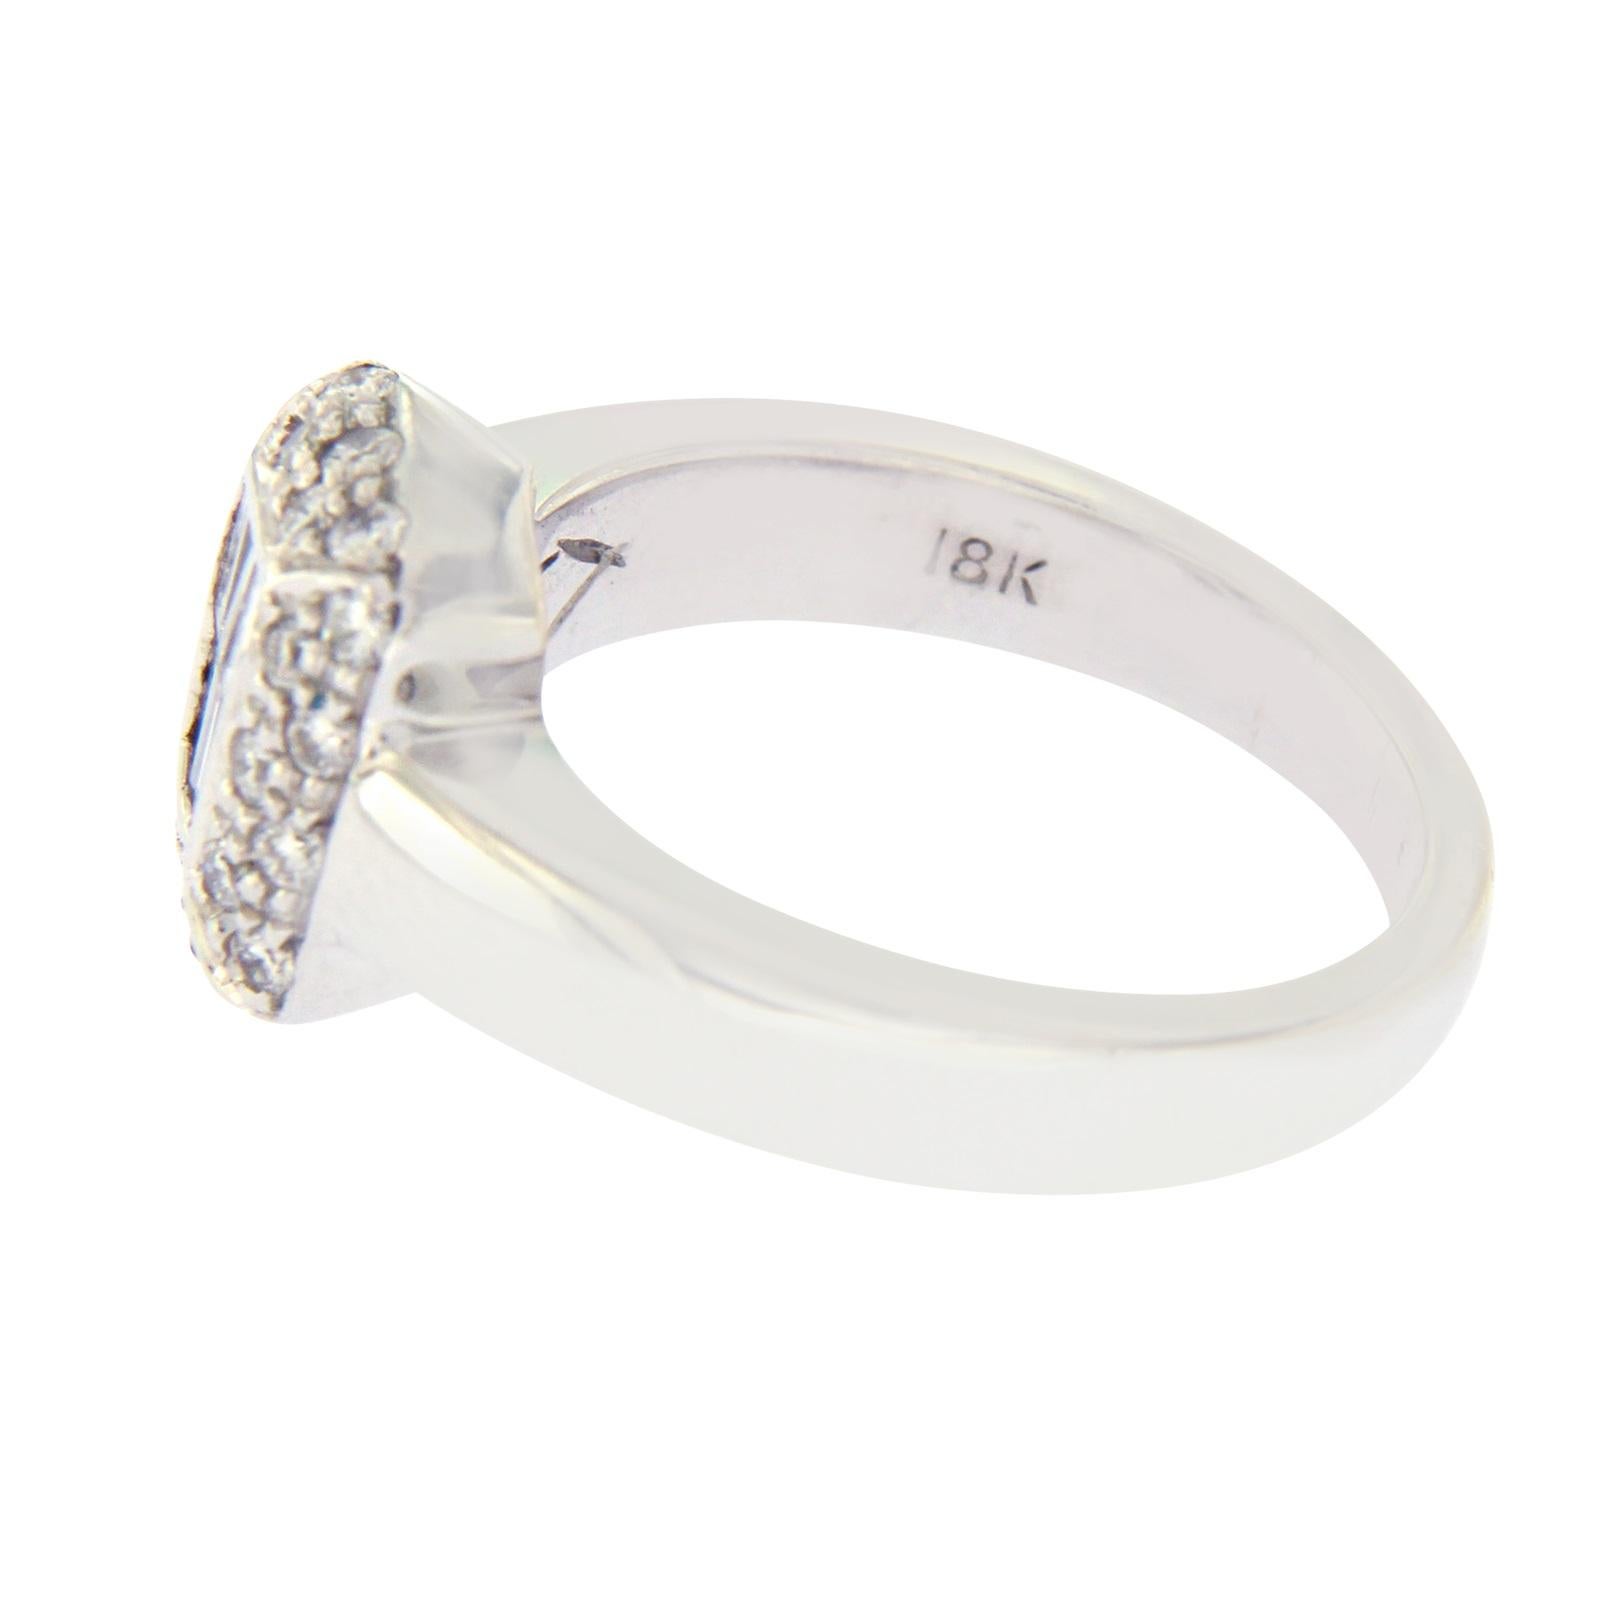 Type: Ring
Top:11 mm
Band Width: 3 mm
Metal: White Gold
Metal Purity: 14K
Size:6 to 8
Hallmarks: -
Total Weight: 9.9 Grams
Stone Type: 1.00 Ct Baguette and Round Diamonds G VS1
Condition: Pre Owned
Stock Number: BL119
..

Please Message Us for the